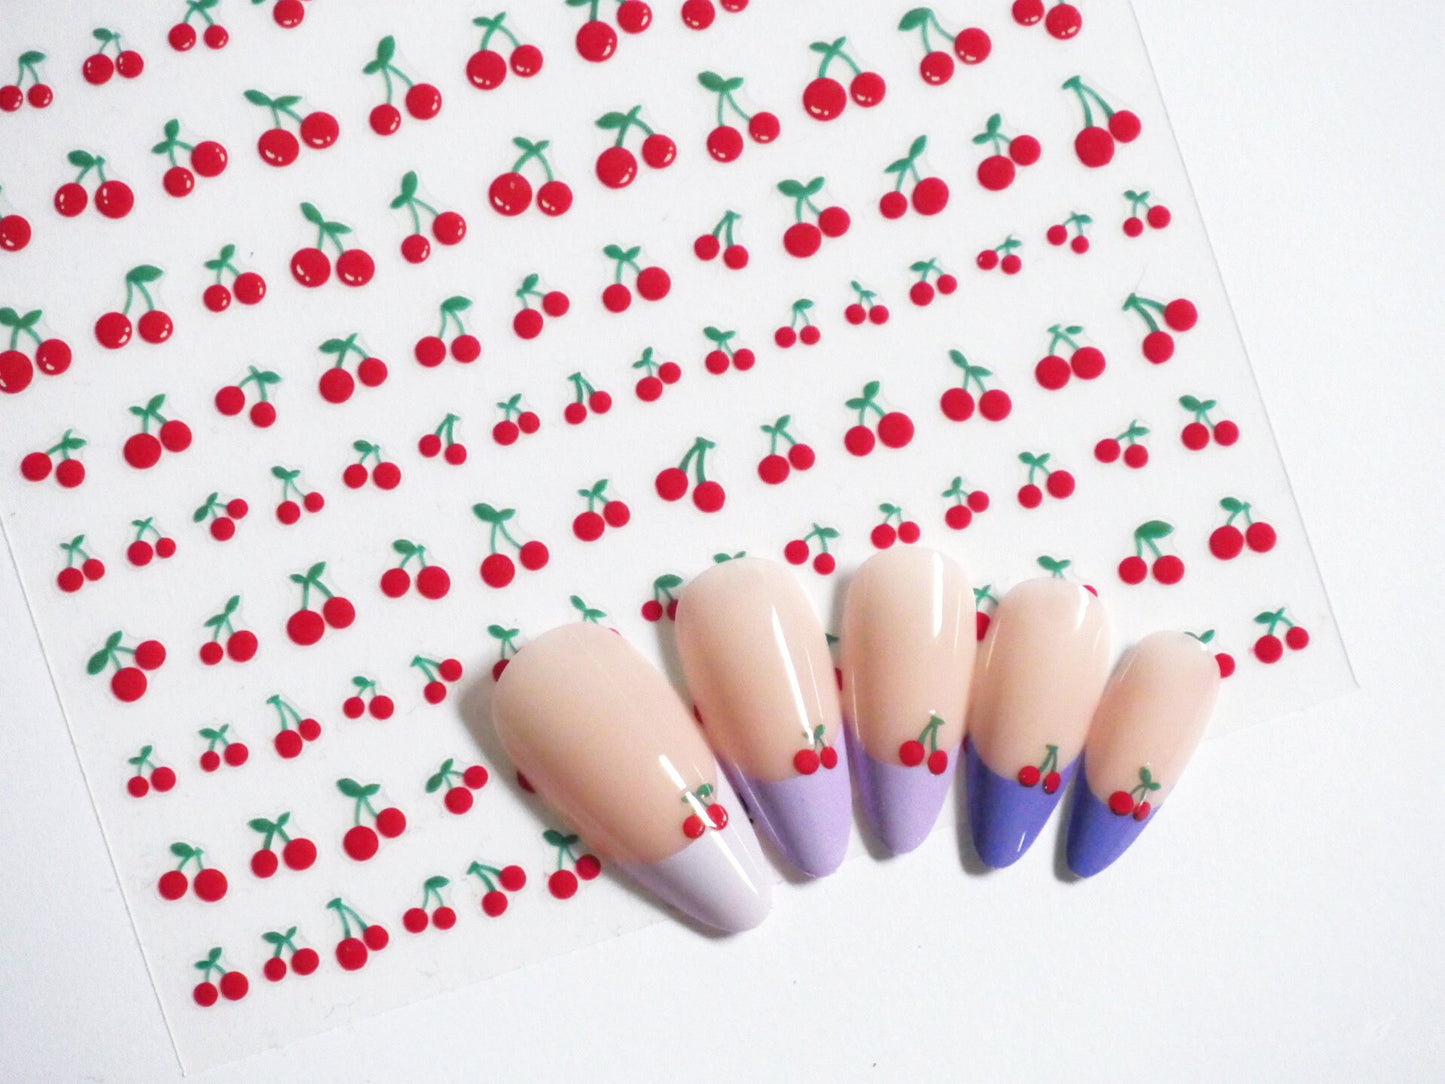 Red Cherry Nail Art Sticker/ Cherries Fruits DIY Tips Guides peel off  Stickers/ Kawaii Summer Nails Decal